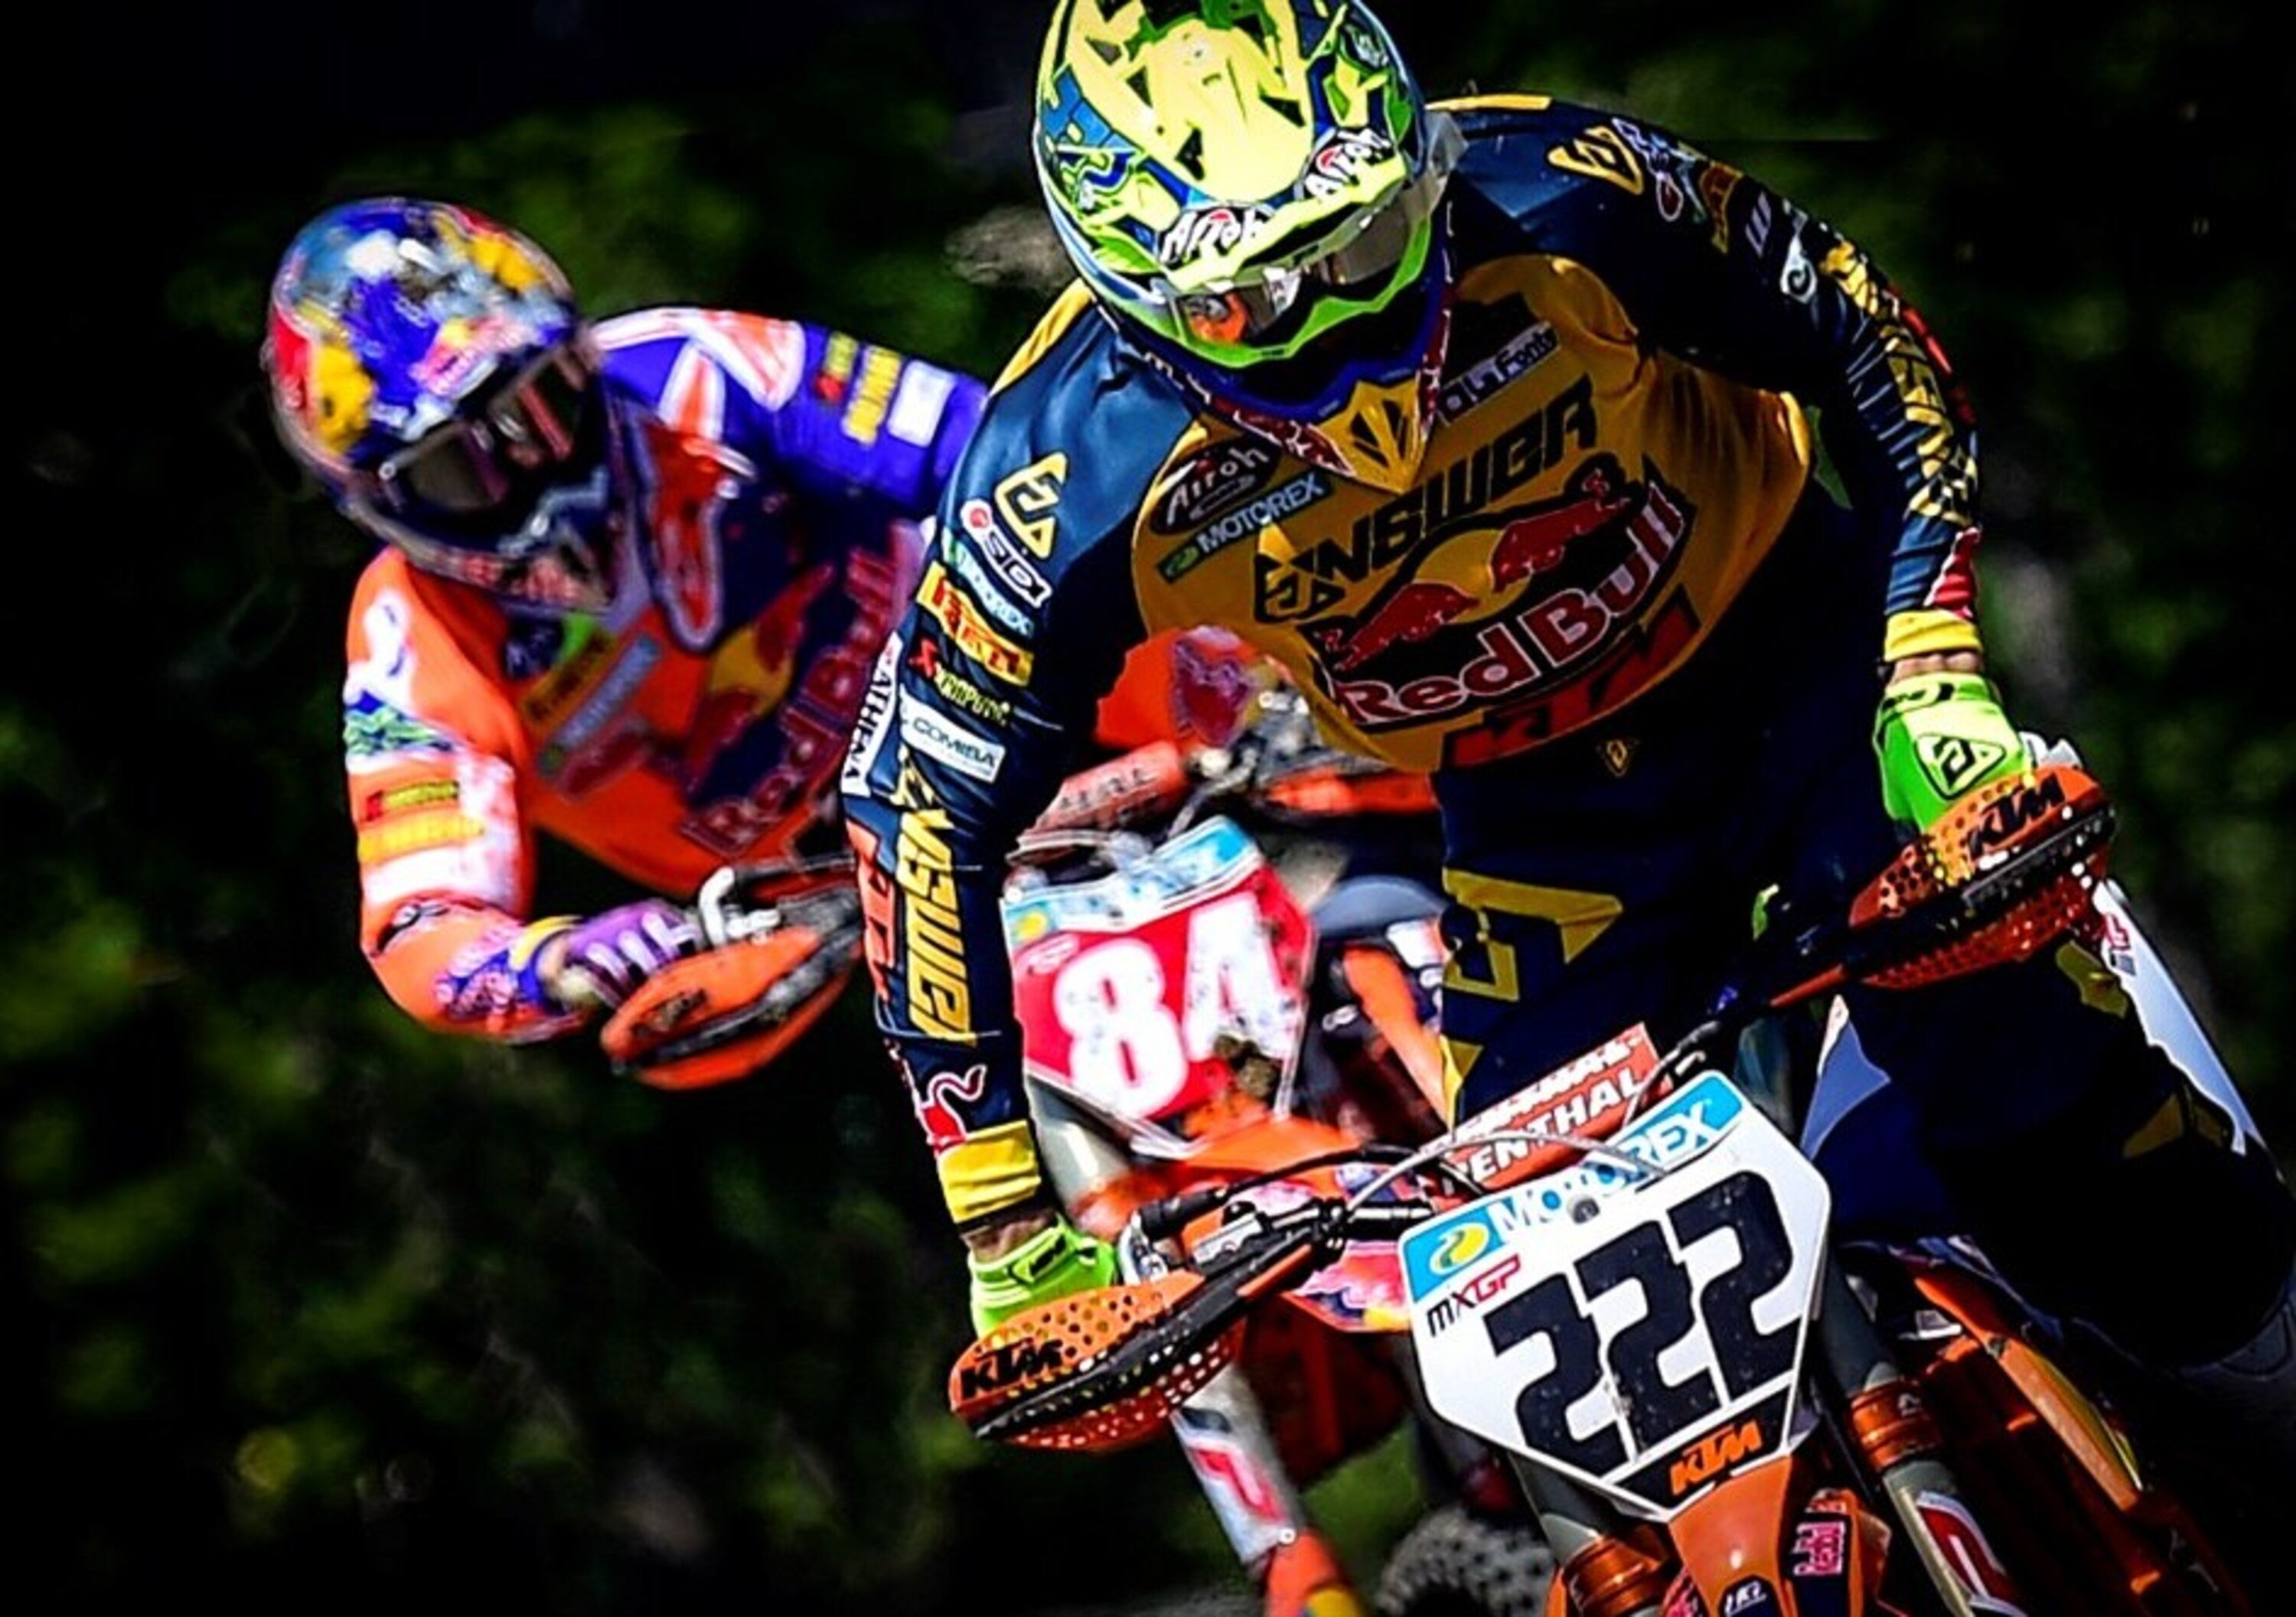 MXGP: Todd Waters sostituisce Bogers in HRC 